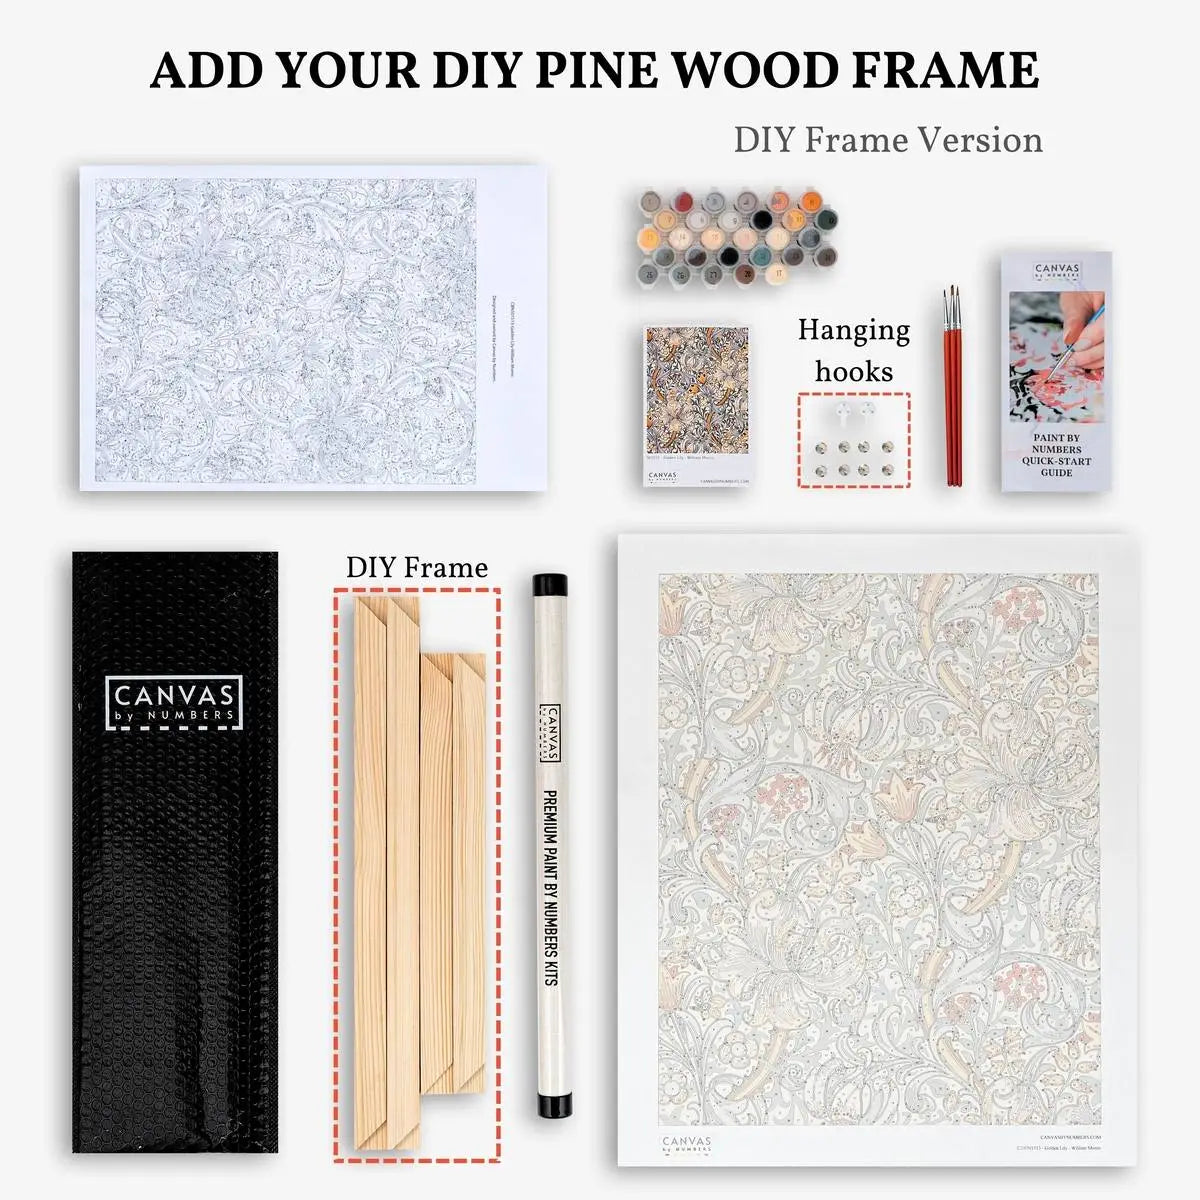 Tips to frame a paint by number canvas, by Alice Price